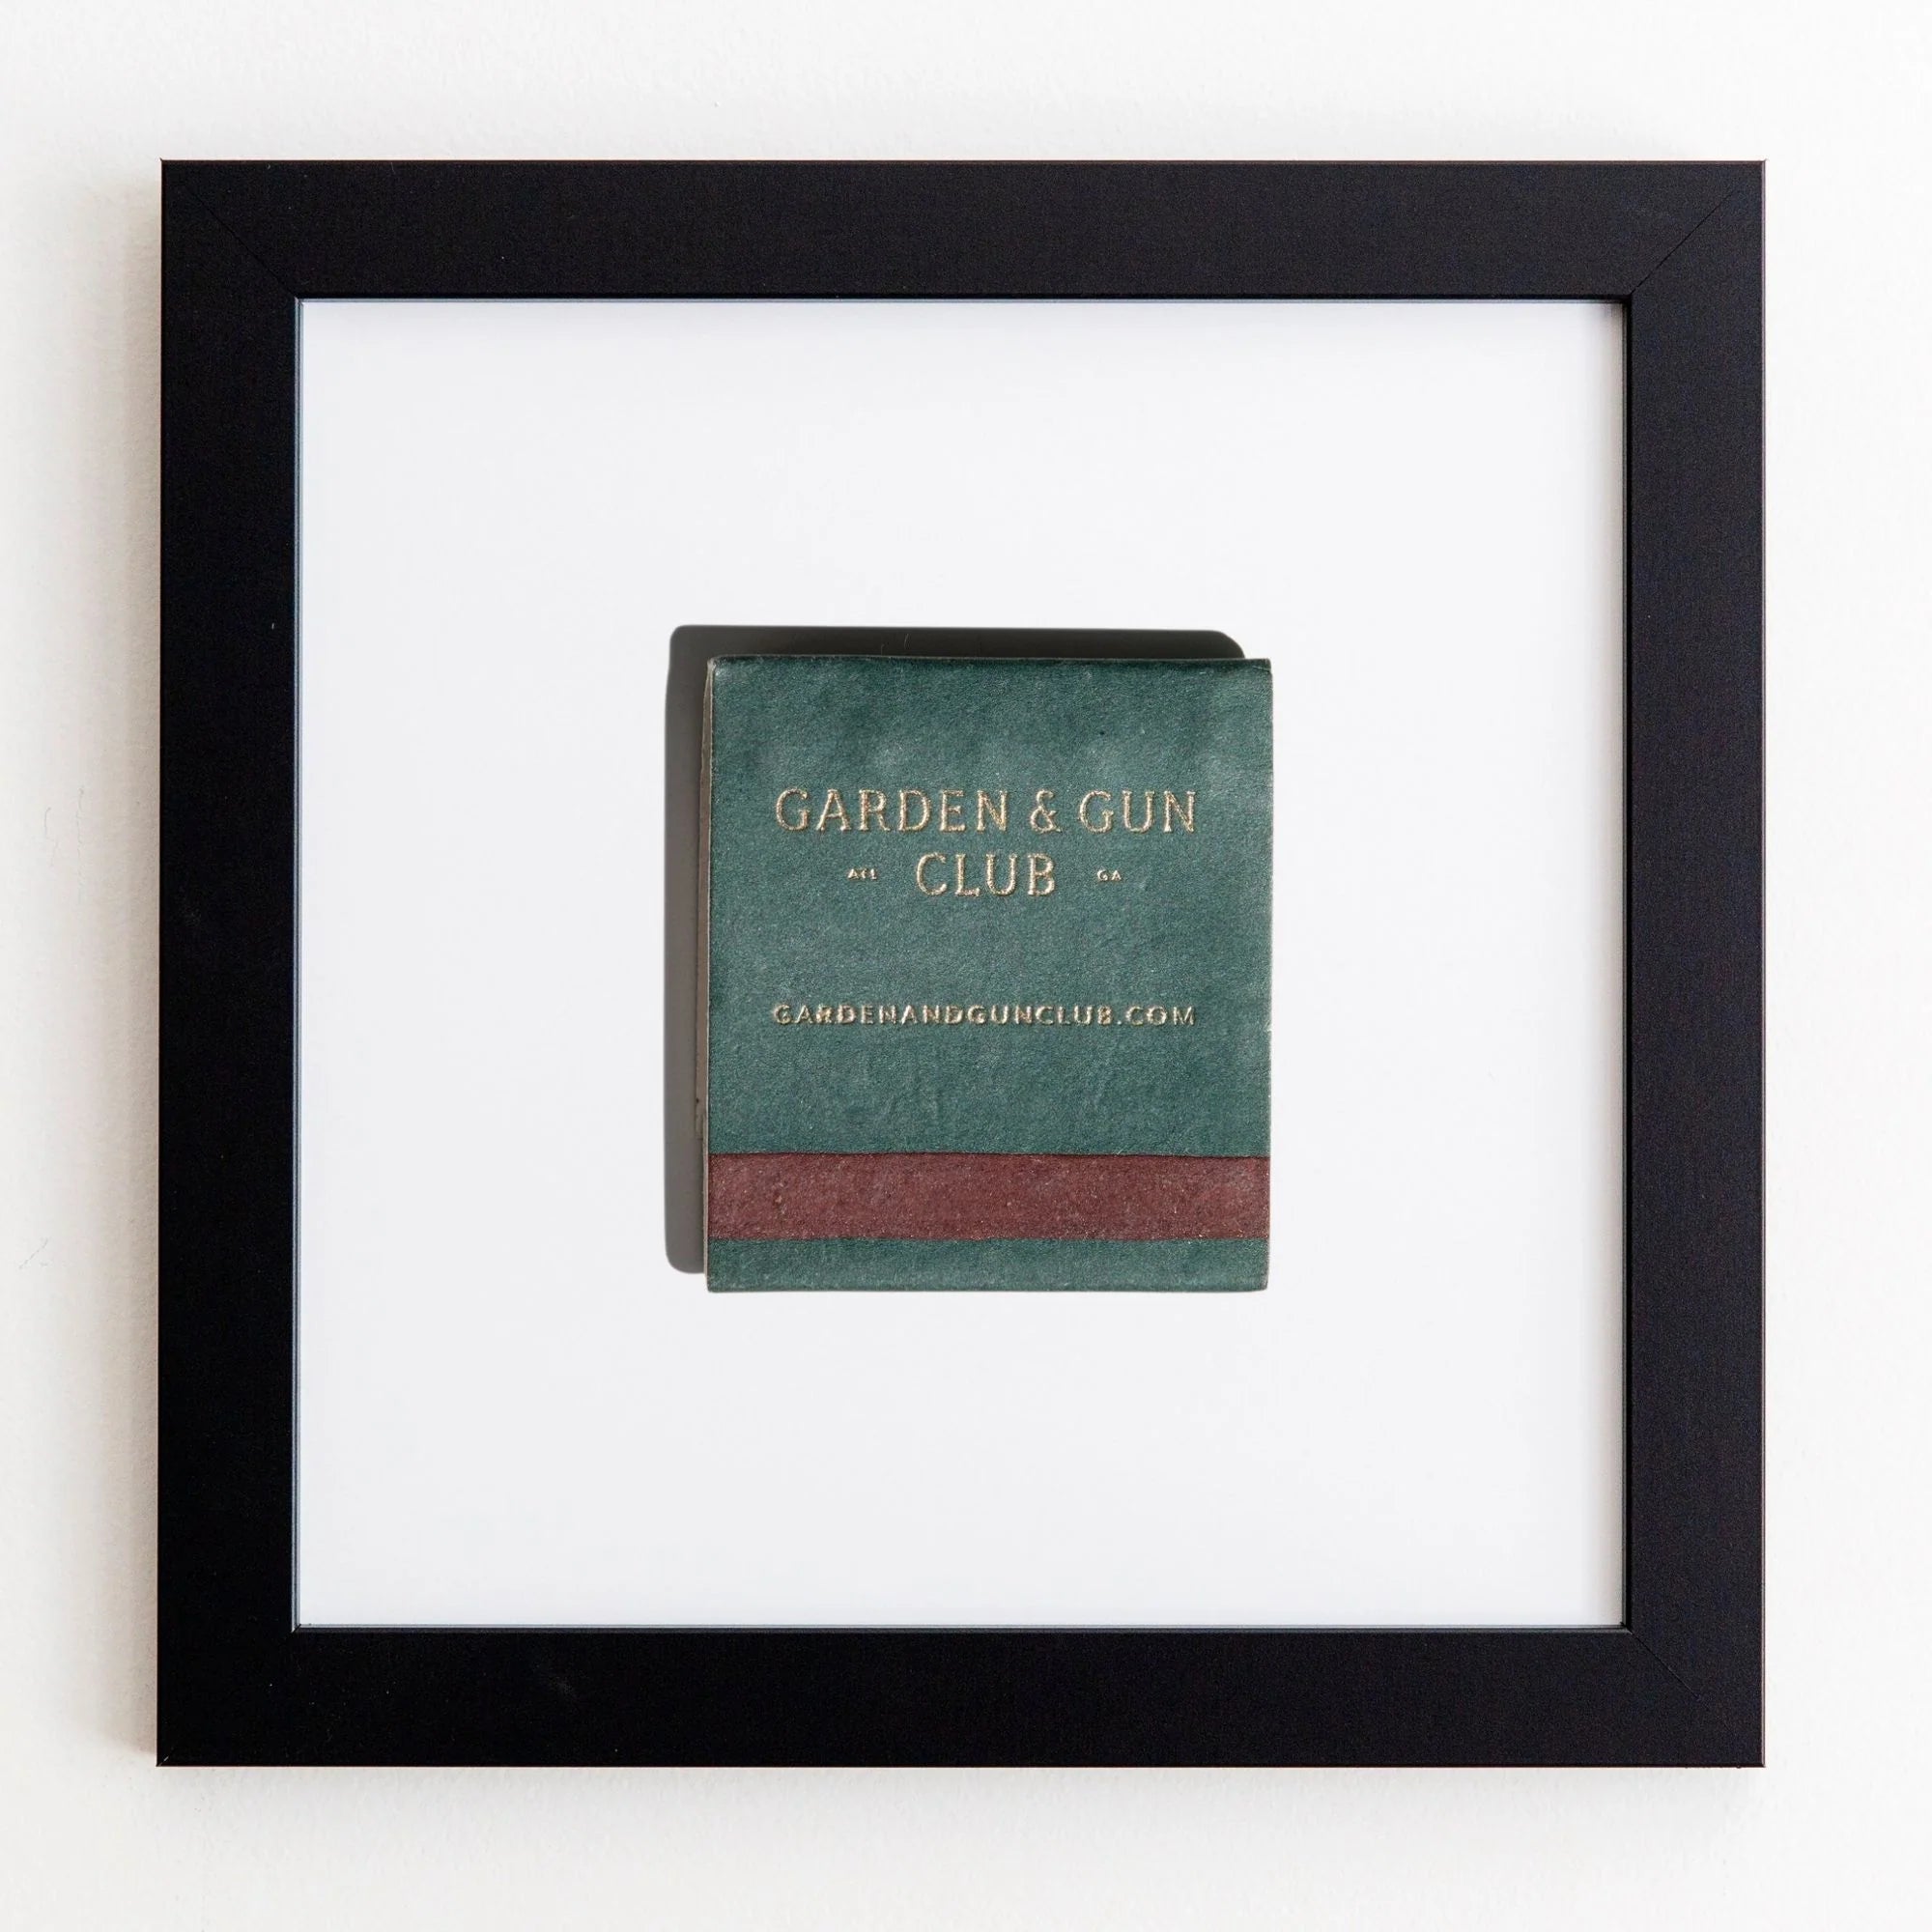 A framed book titled &quot;GARDEN &amp; GUN CLUB&quot; displayed on a white wall. The book cover is dark green with a red spine, and the title is in uppercase letters with Match South Art Square Black Frames.